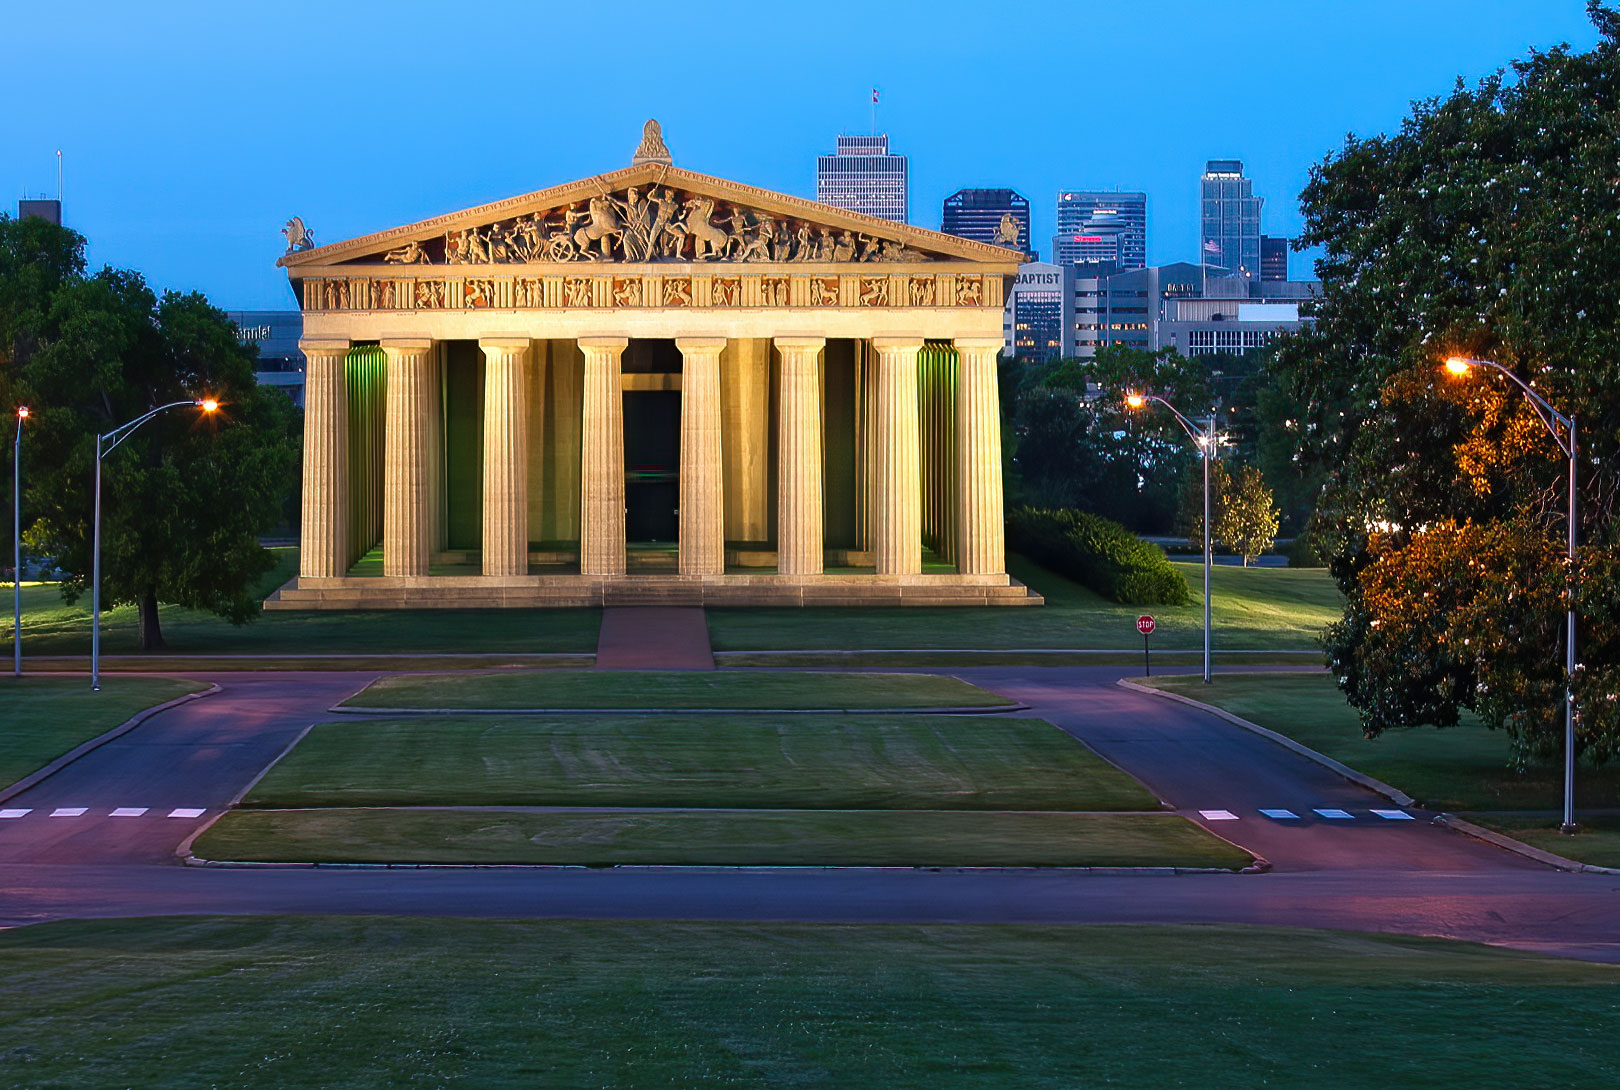 The Parthenon At Centennial Park In Nashville Tennessee